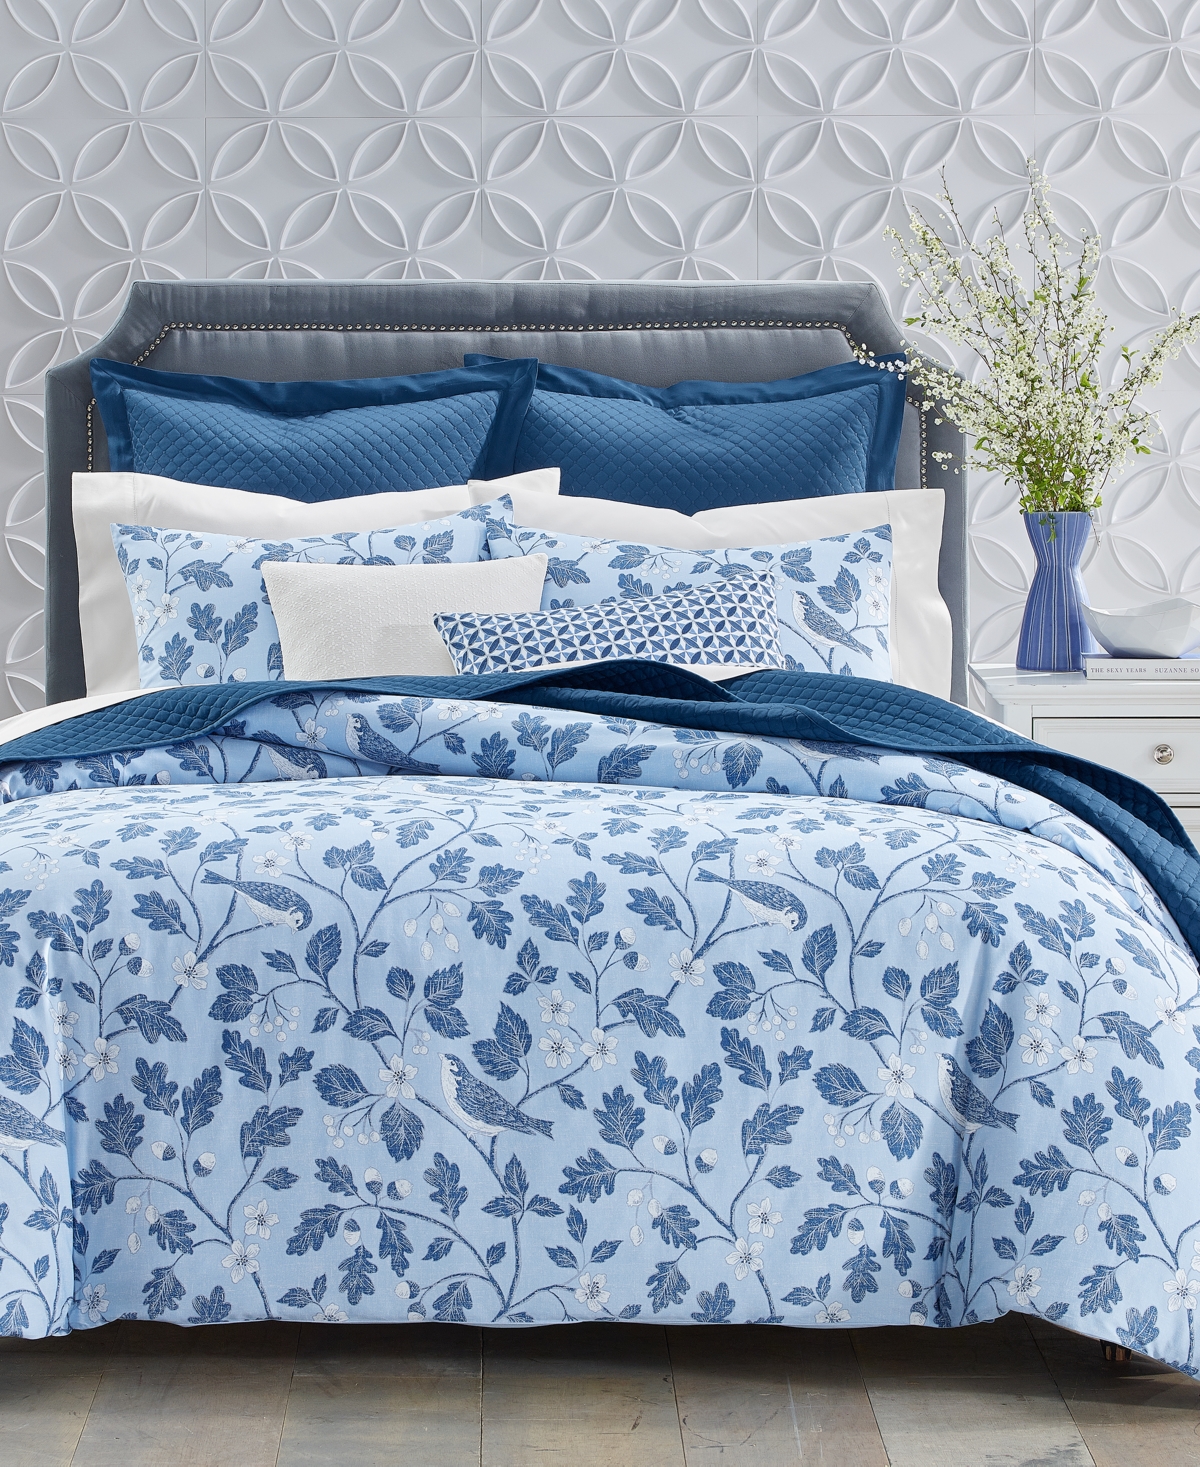 Charter Club Aviary 2-pc. Duvet Cover Set, Twin, Created For Macy's In Blue